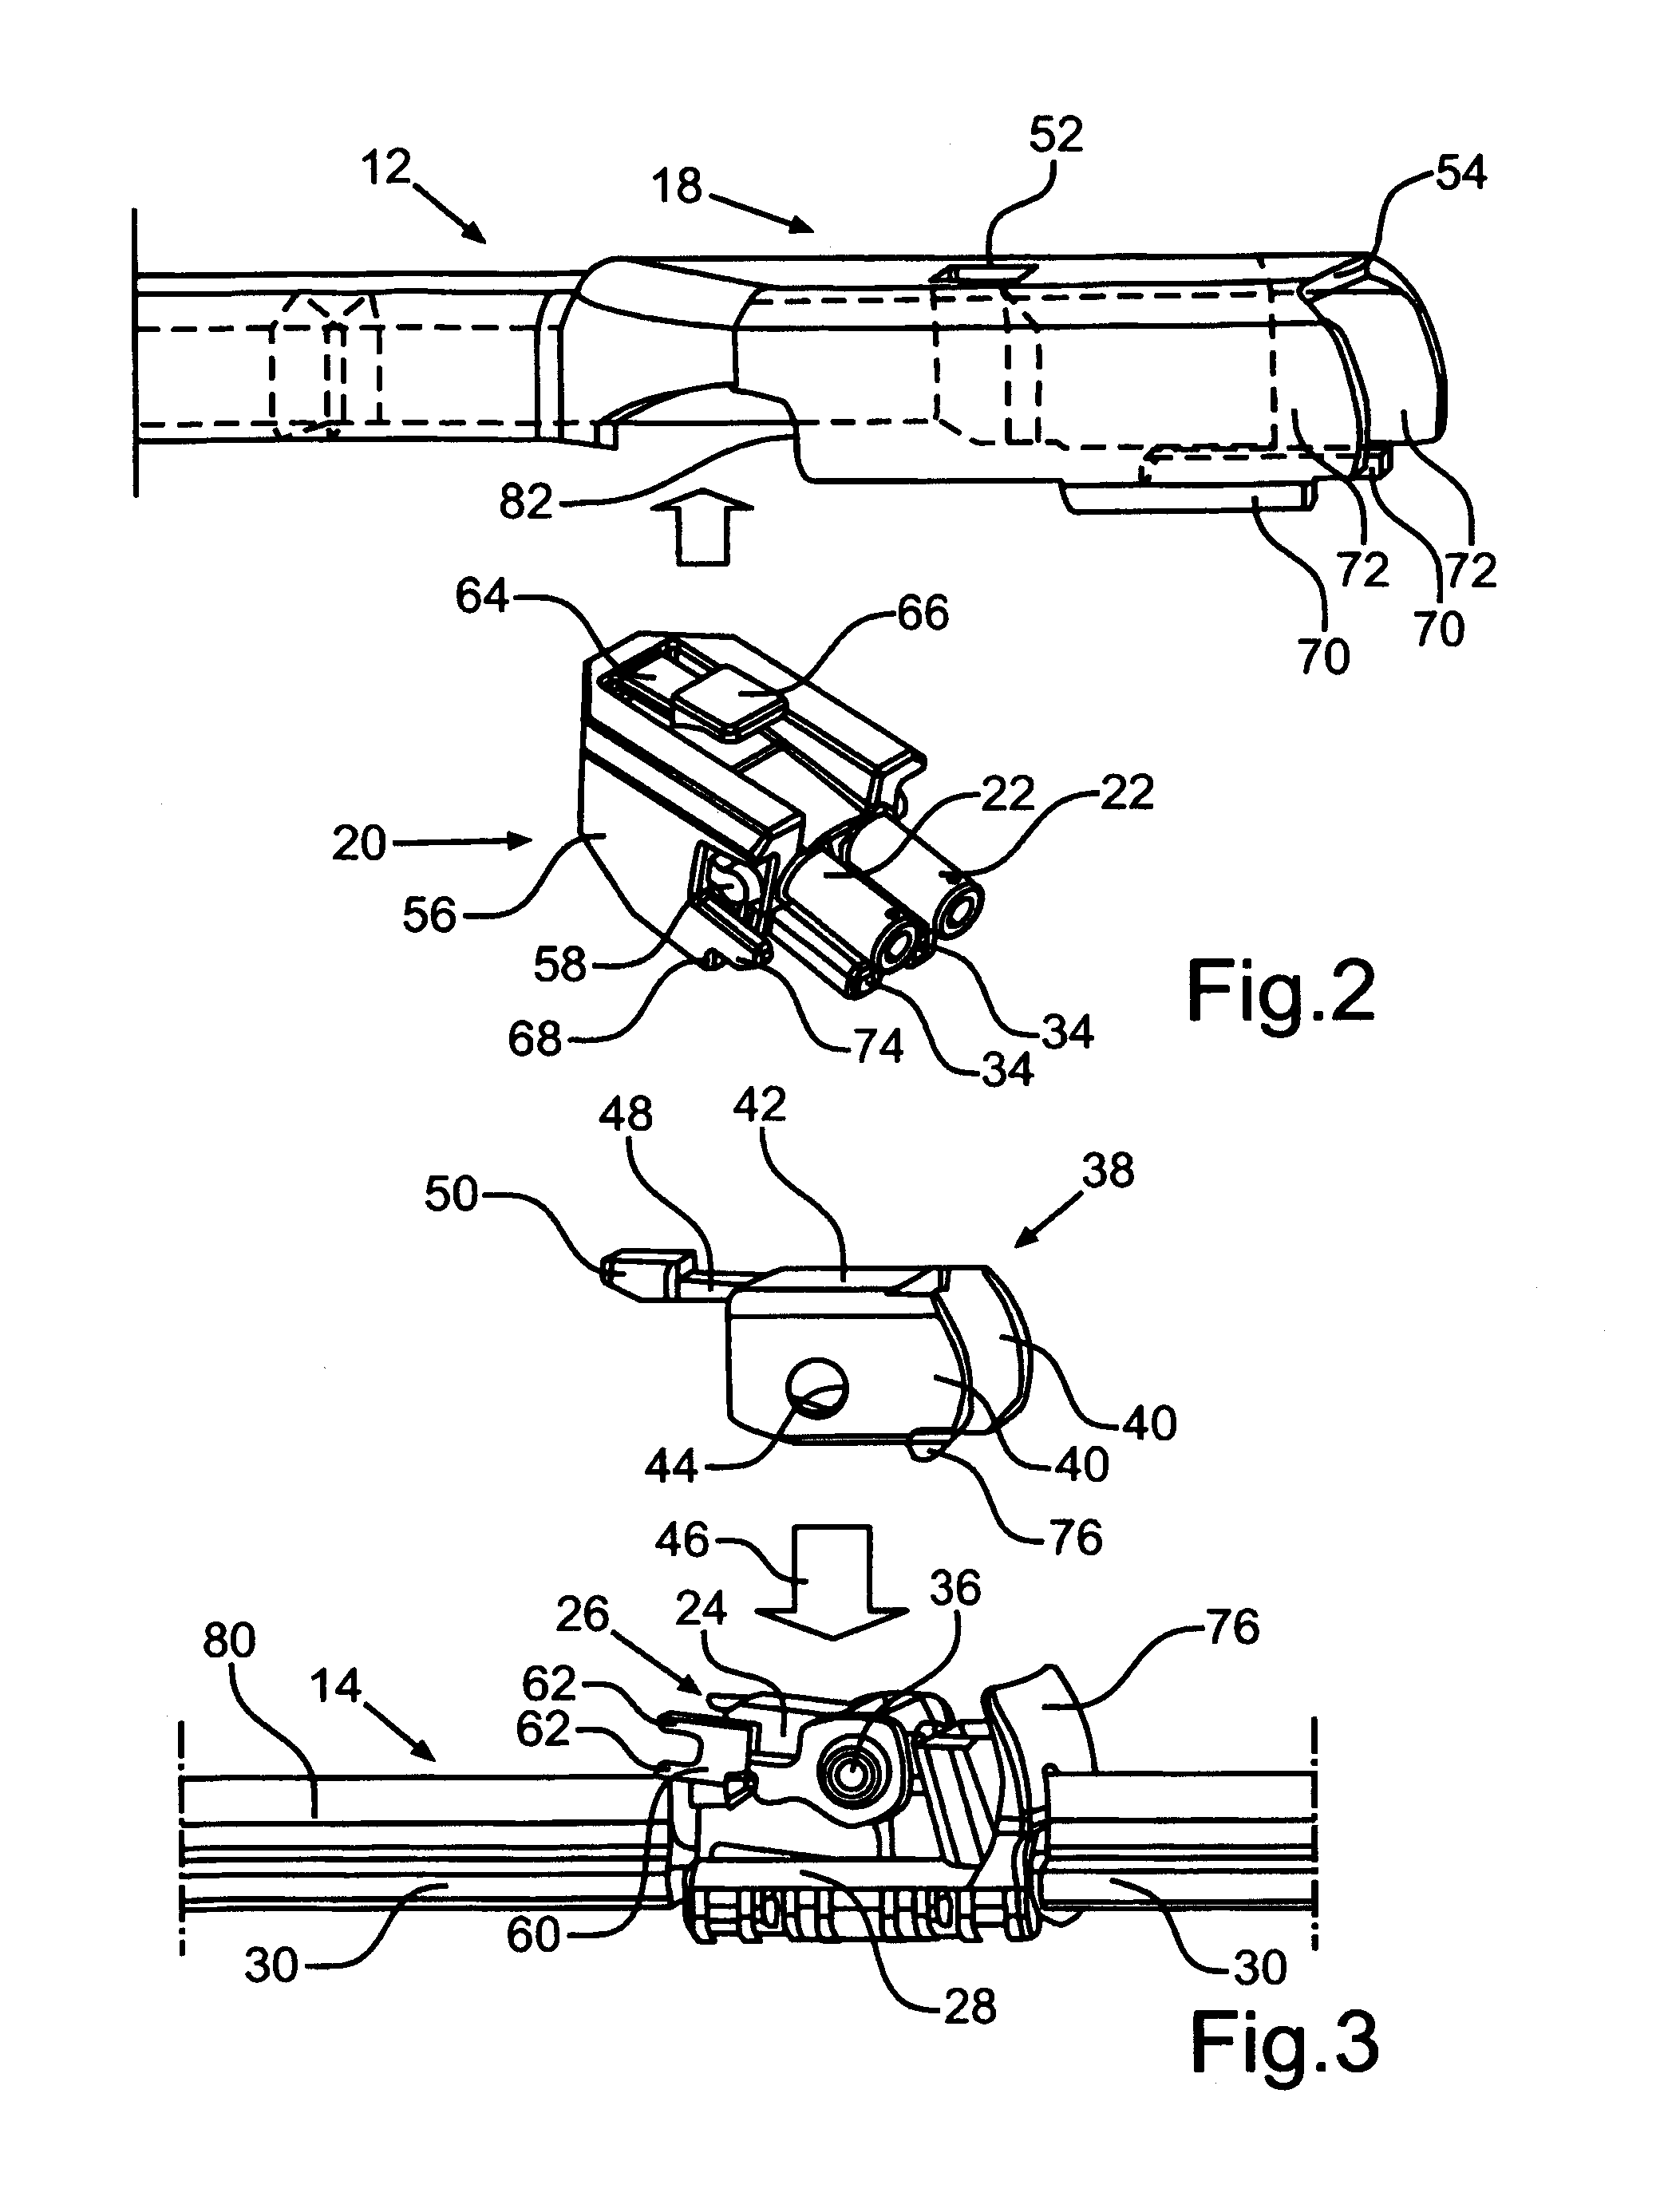 Wiper Arm Arrangement and Method for Connecting a Wiper Blade to a Wiper Arm